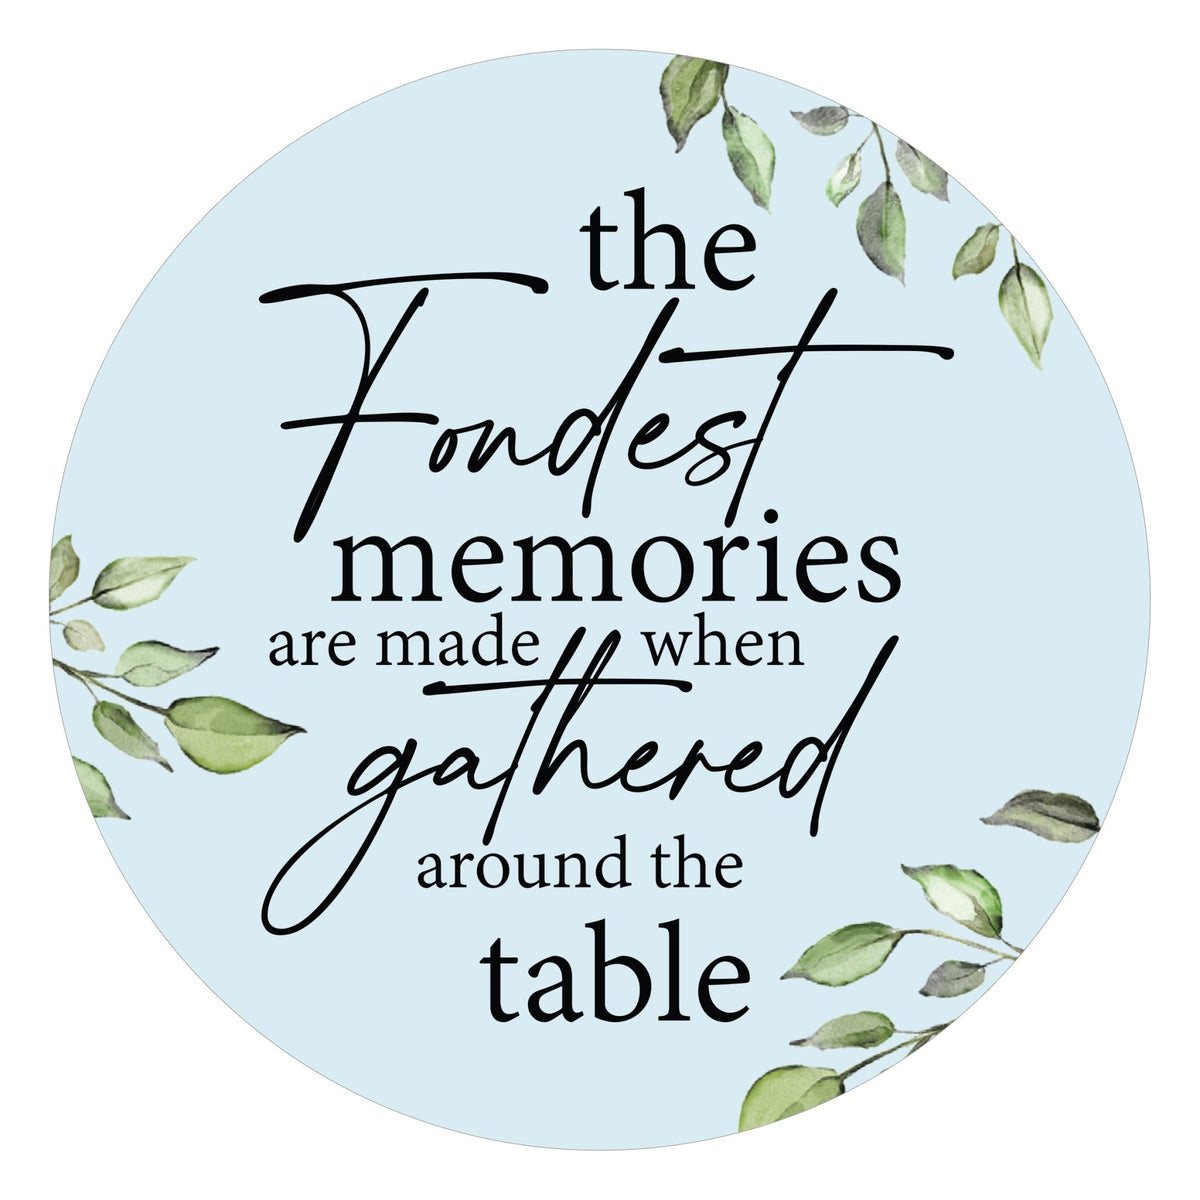 Family &amp; Home Refrigerator Magnet Perfect Gift Idea For Home Décor - Fondest Memories